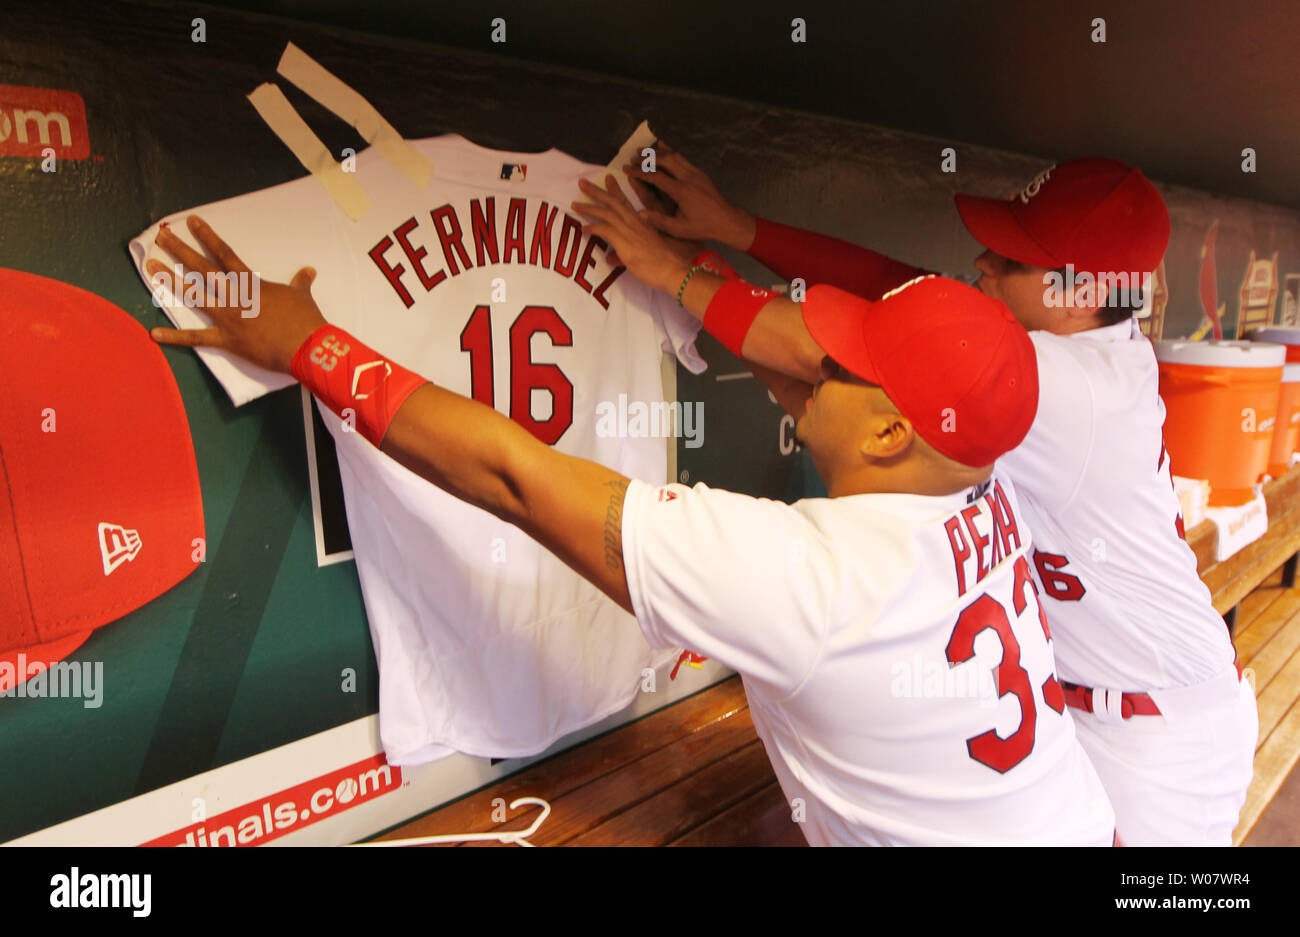 St. Louis Cardinals Aledmys Diaz retrieves a Jose Fernandez shirt that hung  in the dugout for their game against the Cincinnati Reds at Busch Stadium  in St. Louis on September 27, 2016.